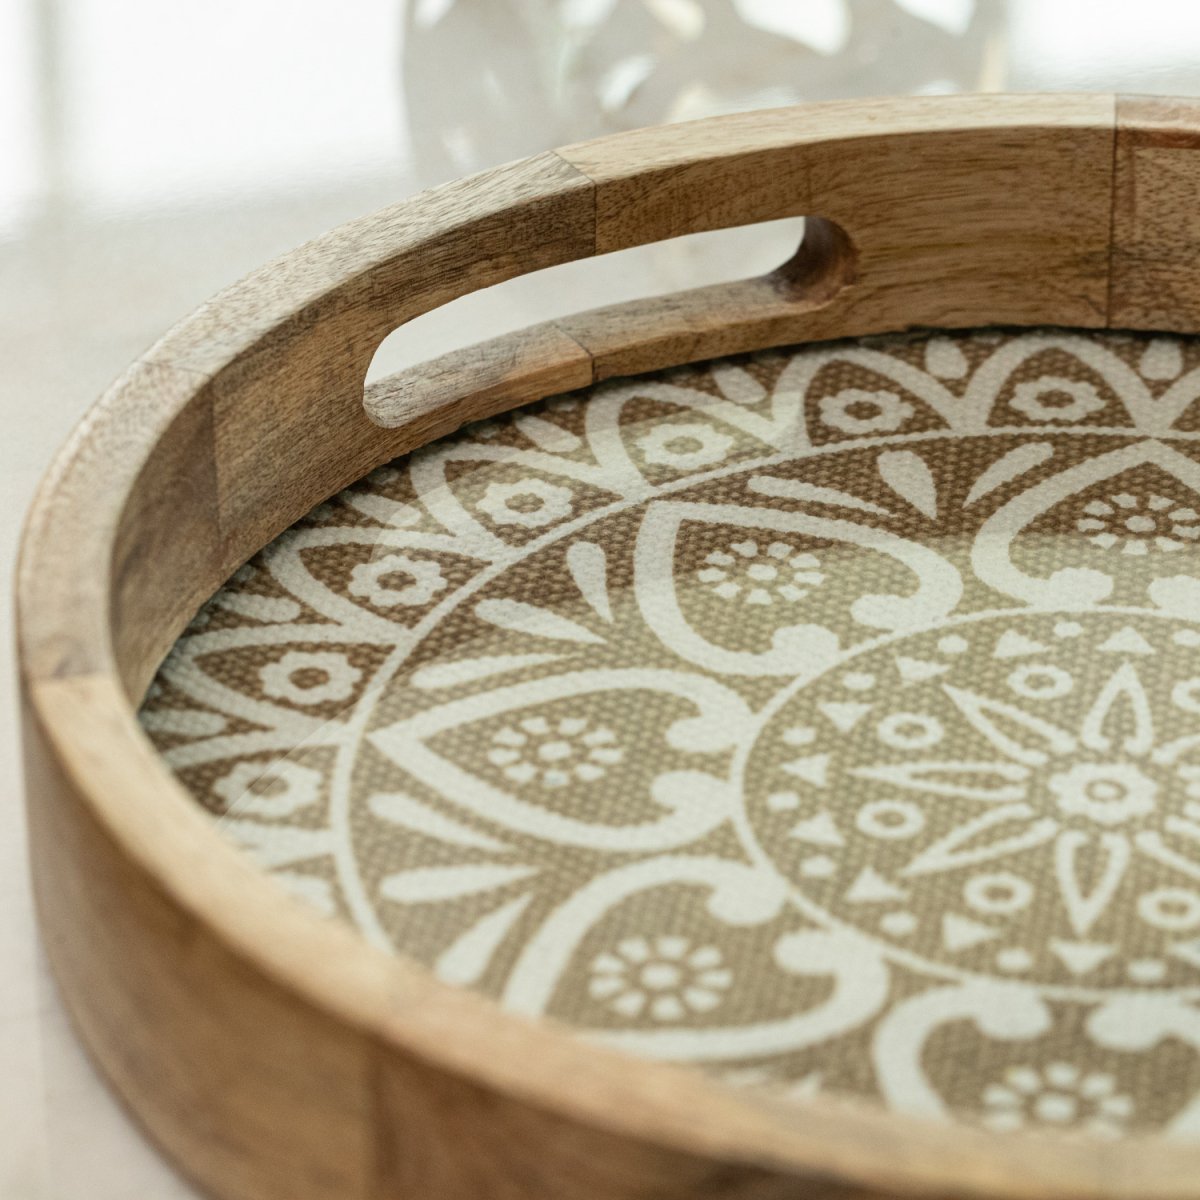 Round Wooden Coffee Table Tray with Knitted Cotton Mat & Glass base close-up image- Aesthetic Living